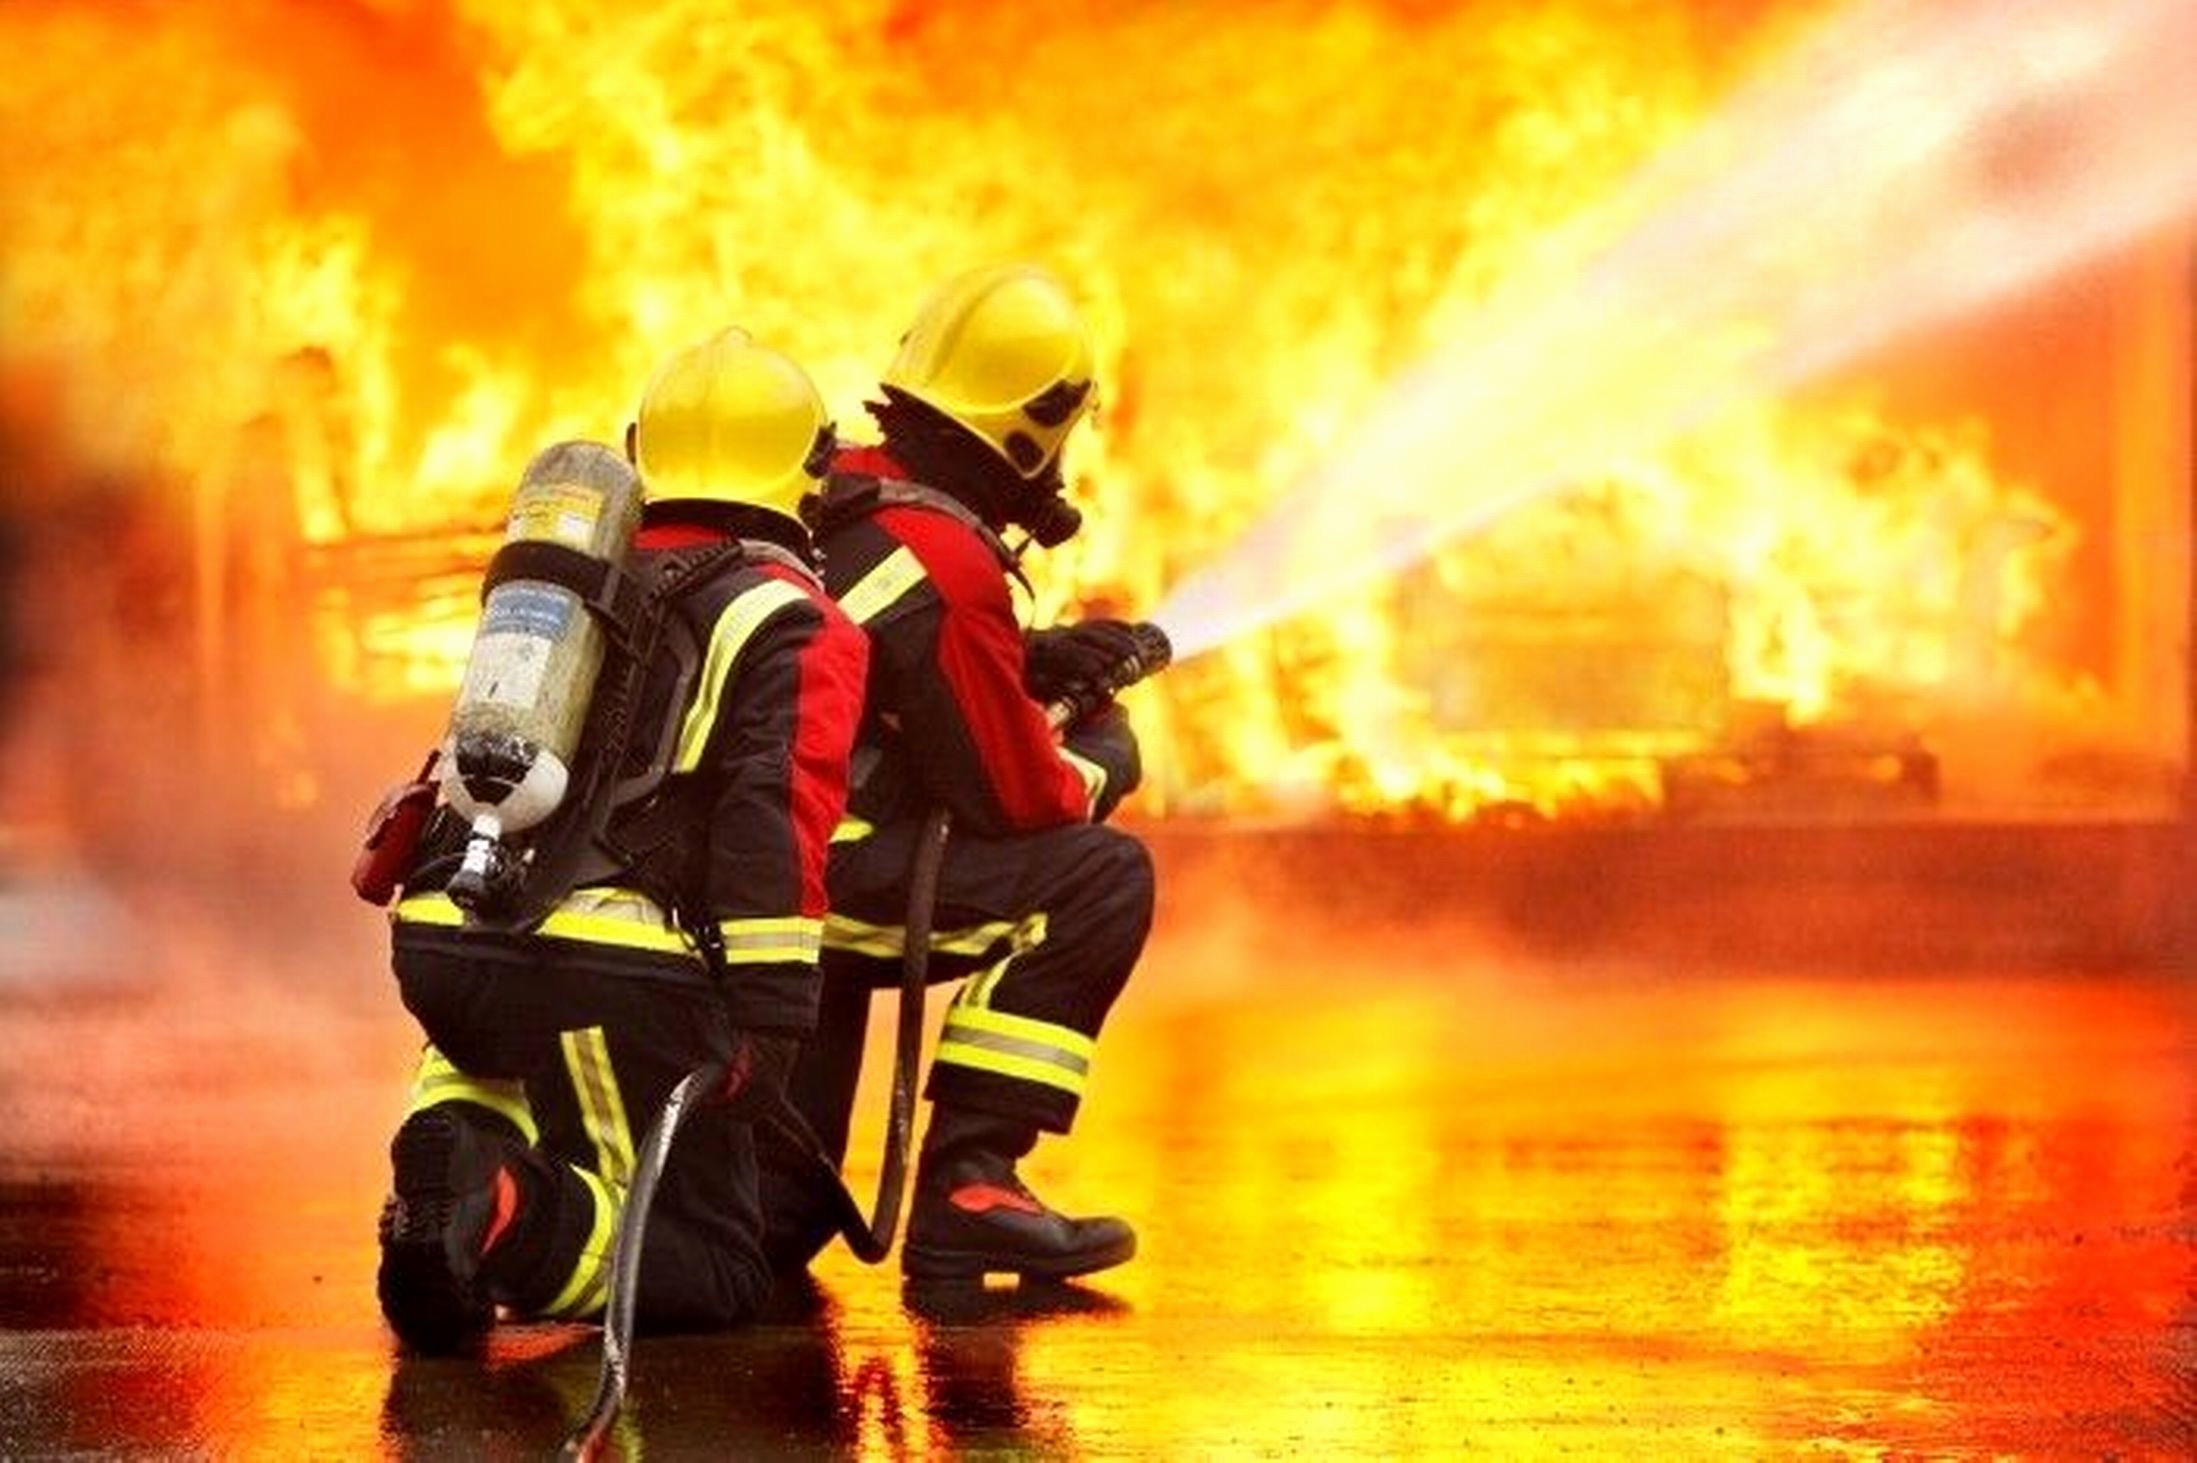 2197x1463 1080x1920 Title : firefighter wallpaper for phone (55+ images) Dimension :  1080 x 1920. File Type : JPG/JPEG